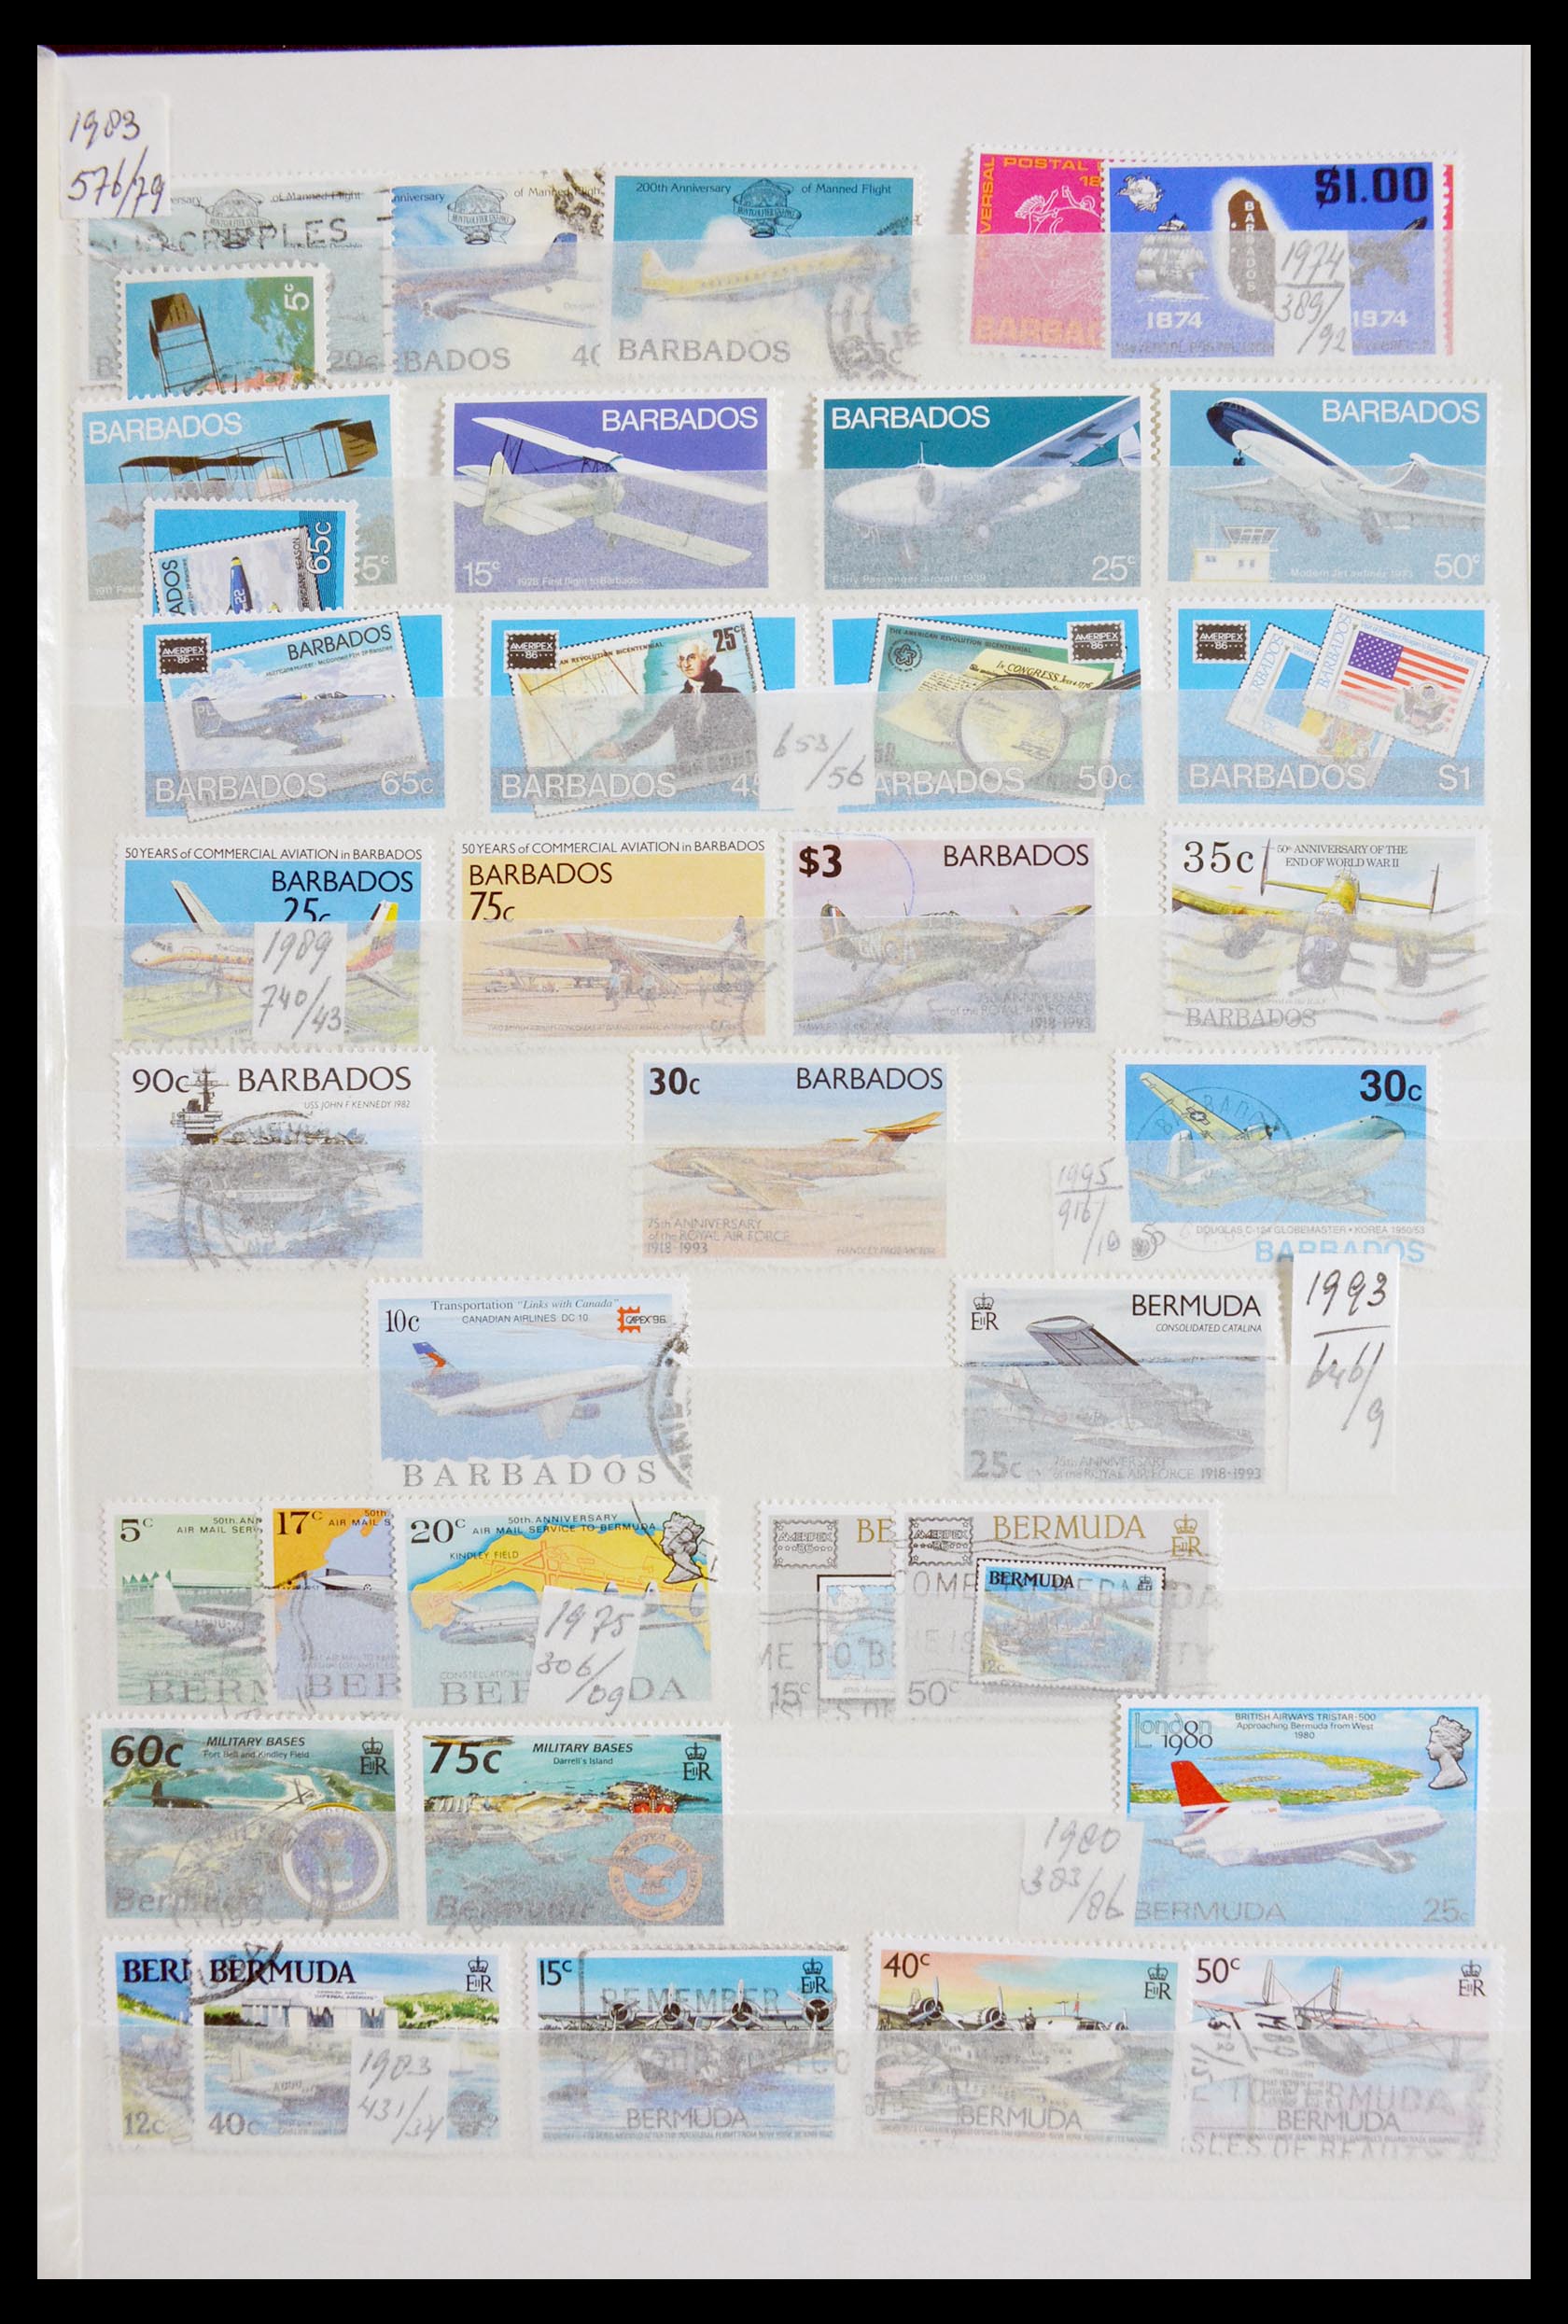 29917 015 - 29917 Latin America airmail stamps.